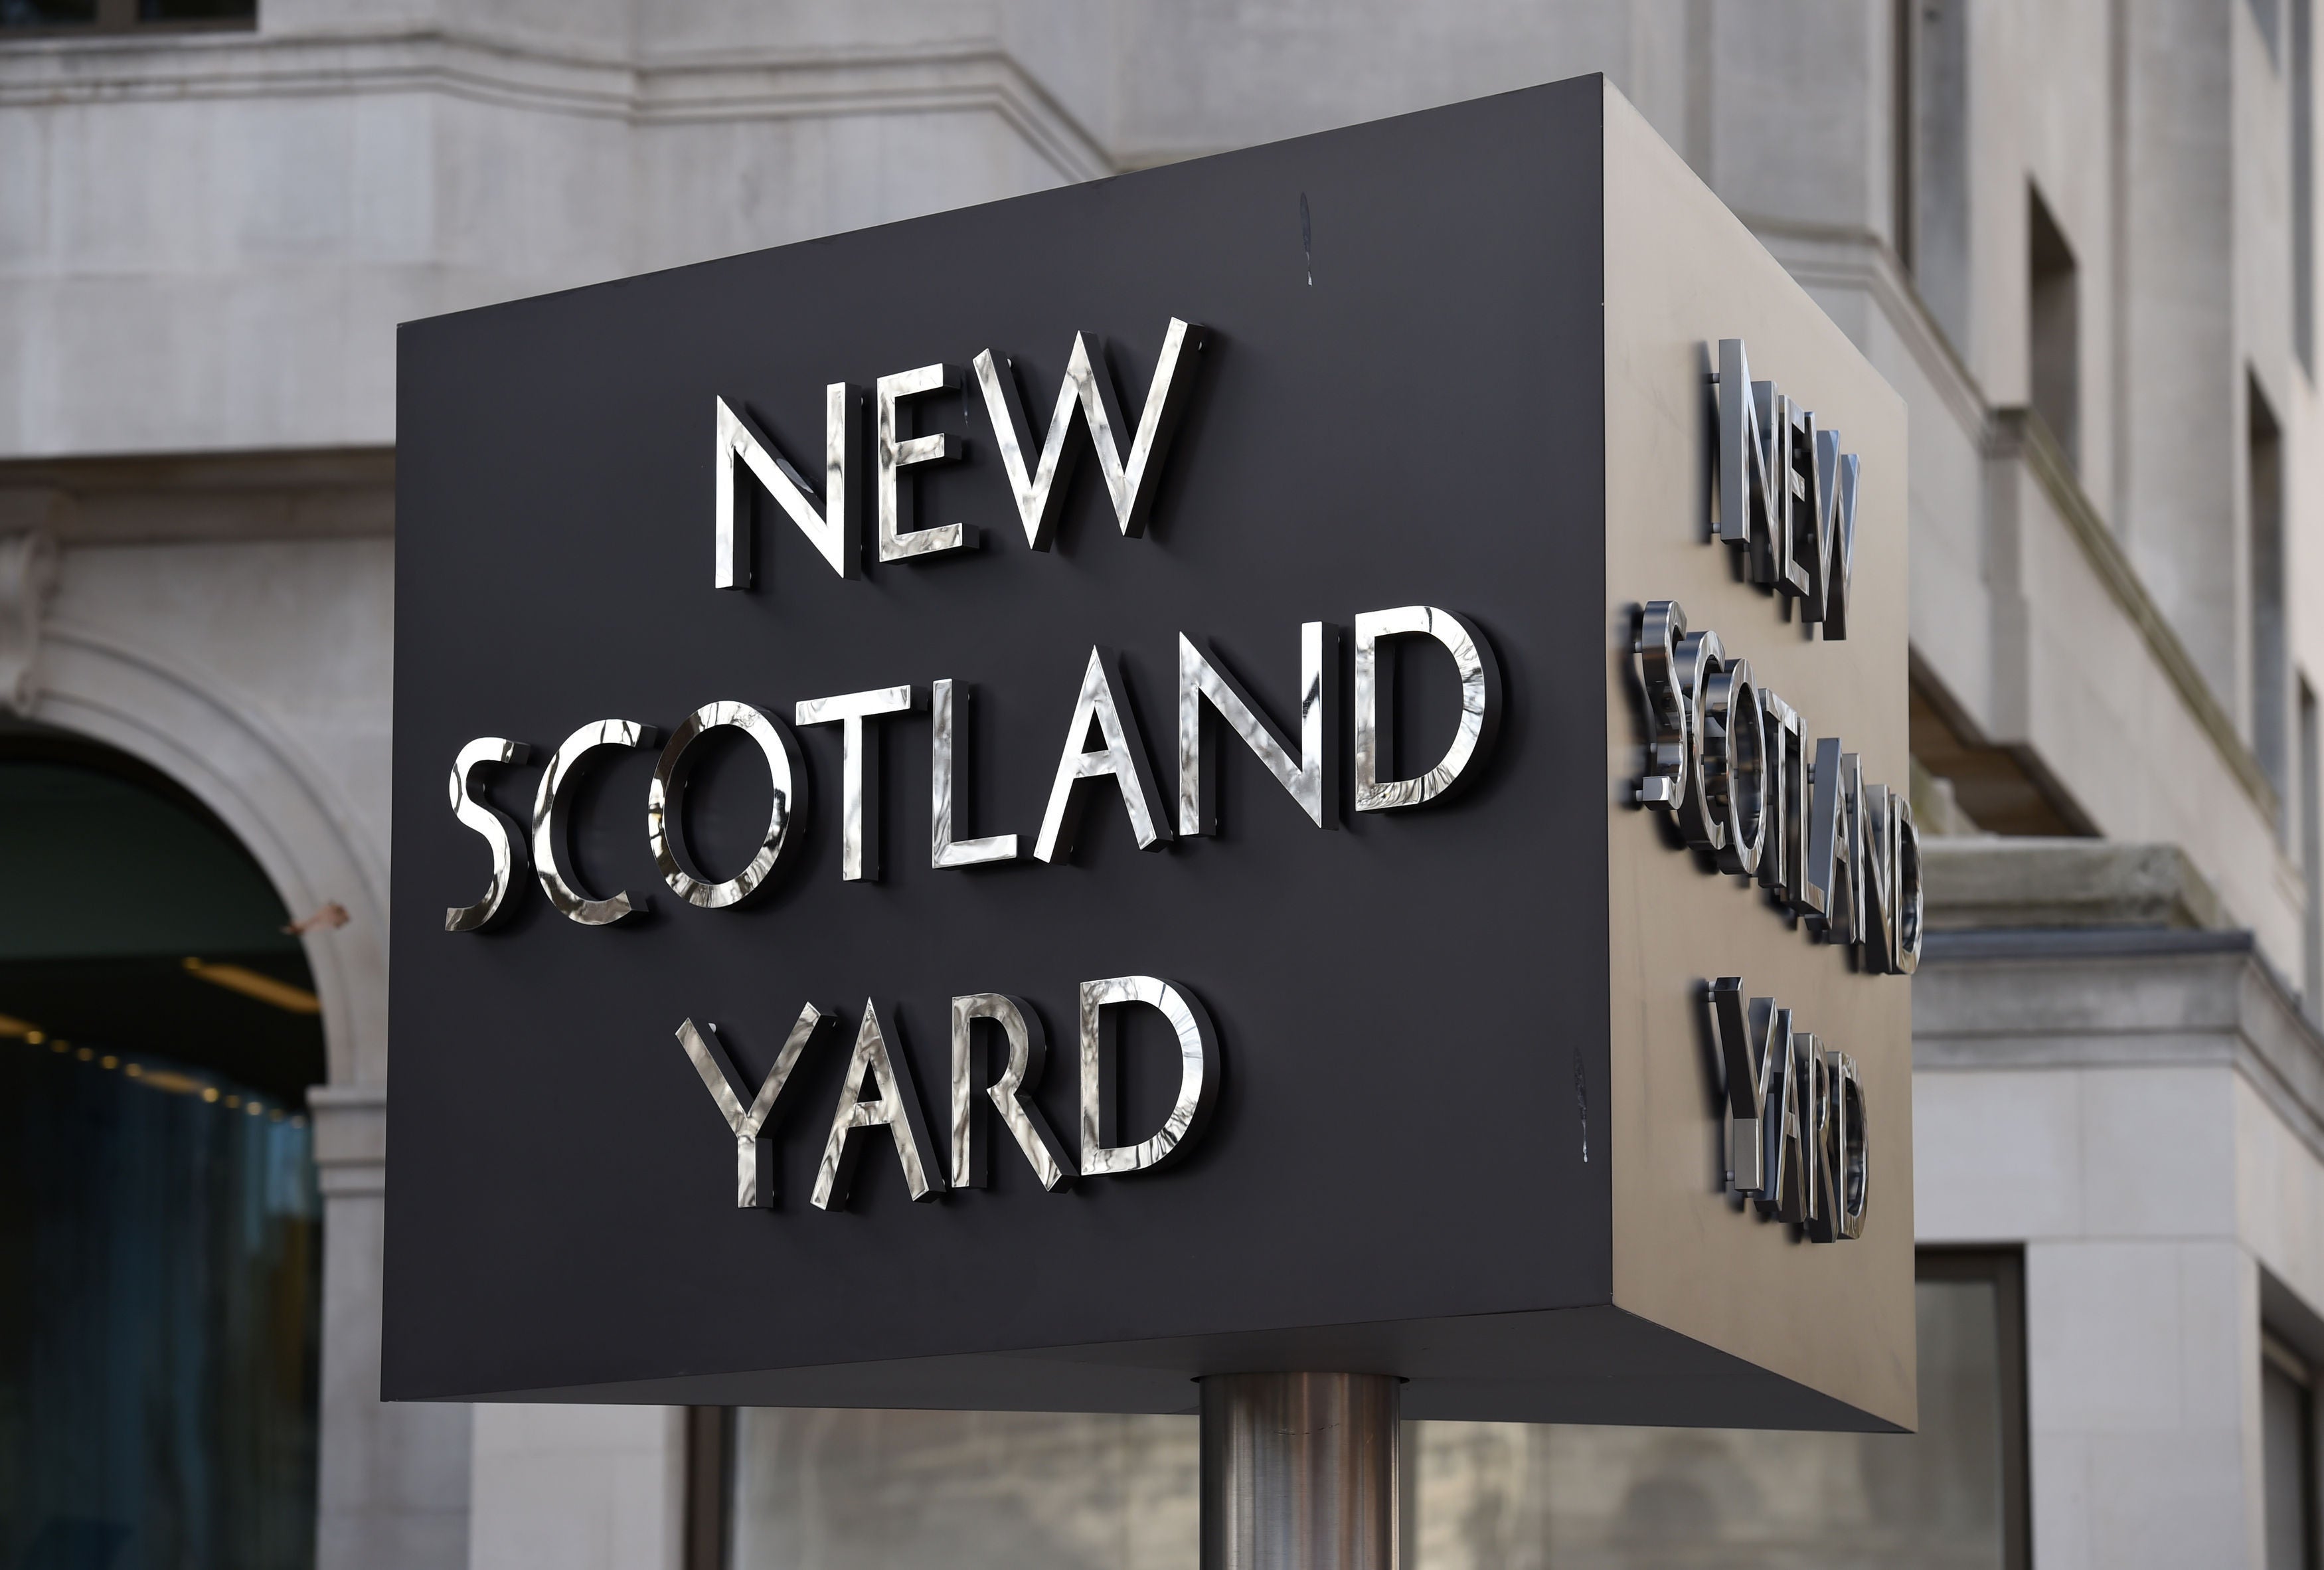 Scotland Yard will organise a hearing for the officer